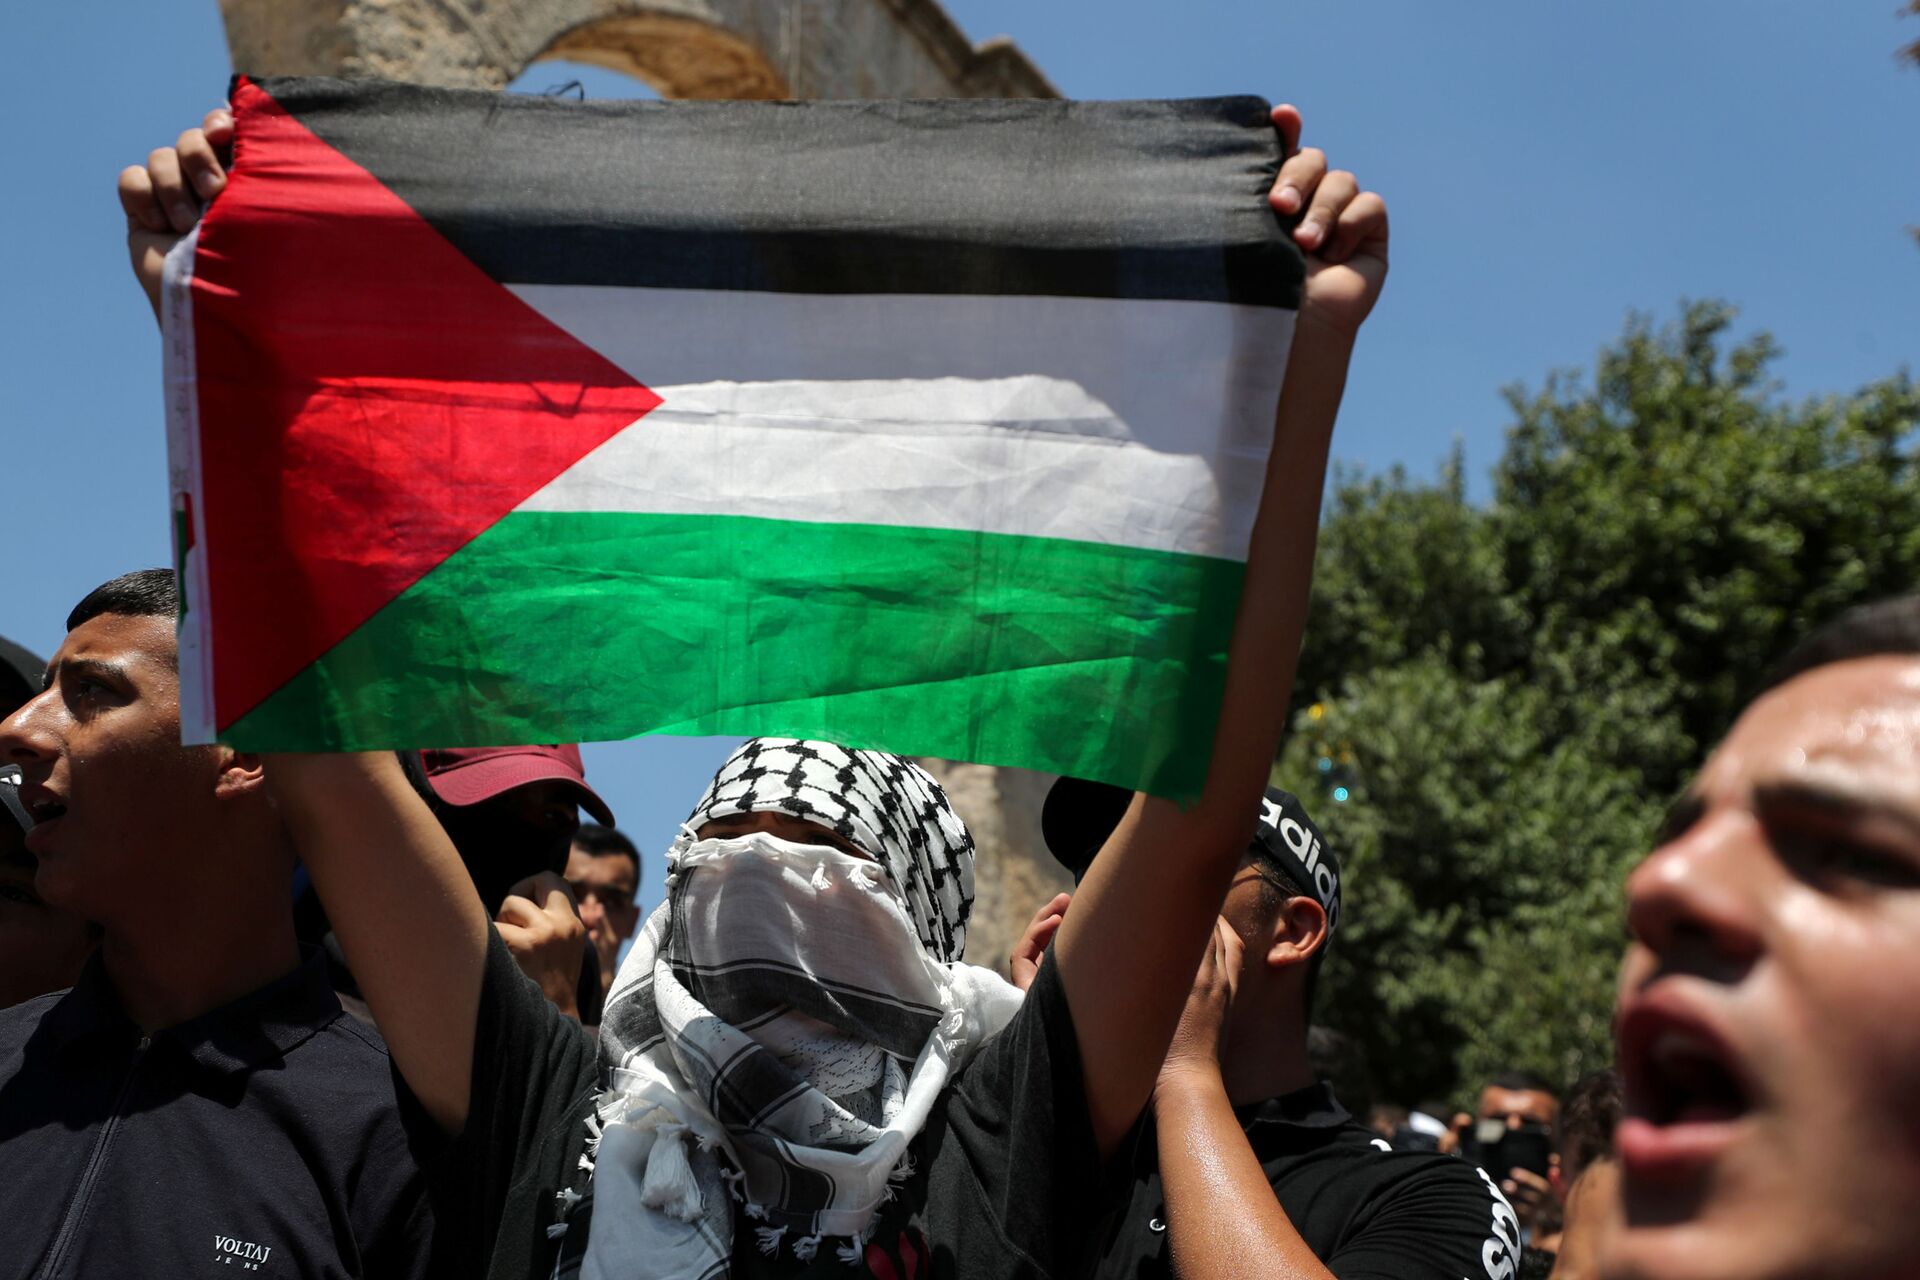 A demonstrator holds a Palestinian flag during a protest over the death of Nizar Banat, at the compound that houses Al-Aqsa Mosque, known to Muslims as Noble Sanctuary and to Jews as Temple Mount, in Jerusalem's Old City, June 25, 2021. - Sputnik International, 1920, 21.01.2022